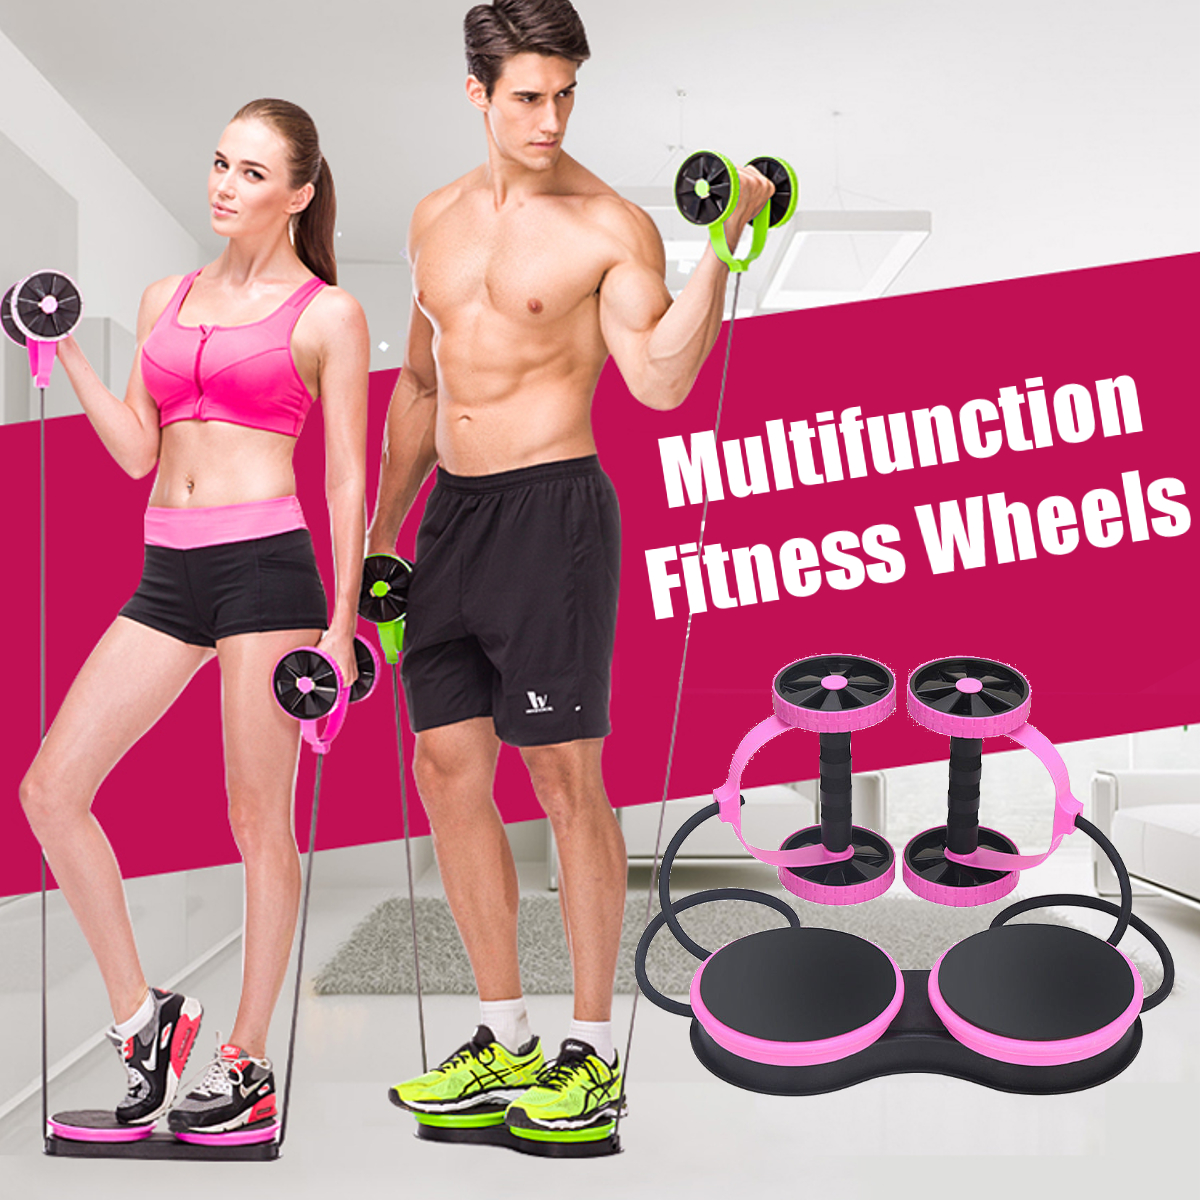 Multi-Function-Home-Abdominal-Wheel-Roller-Arm-Waist-Leg-Muscle-Trainer-Fitness-Exercise-Tools-1679317-1